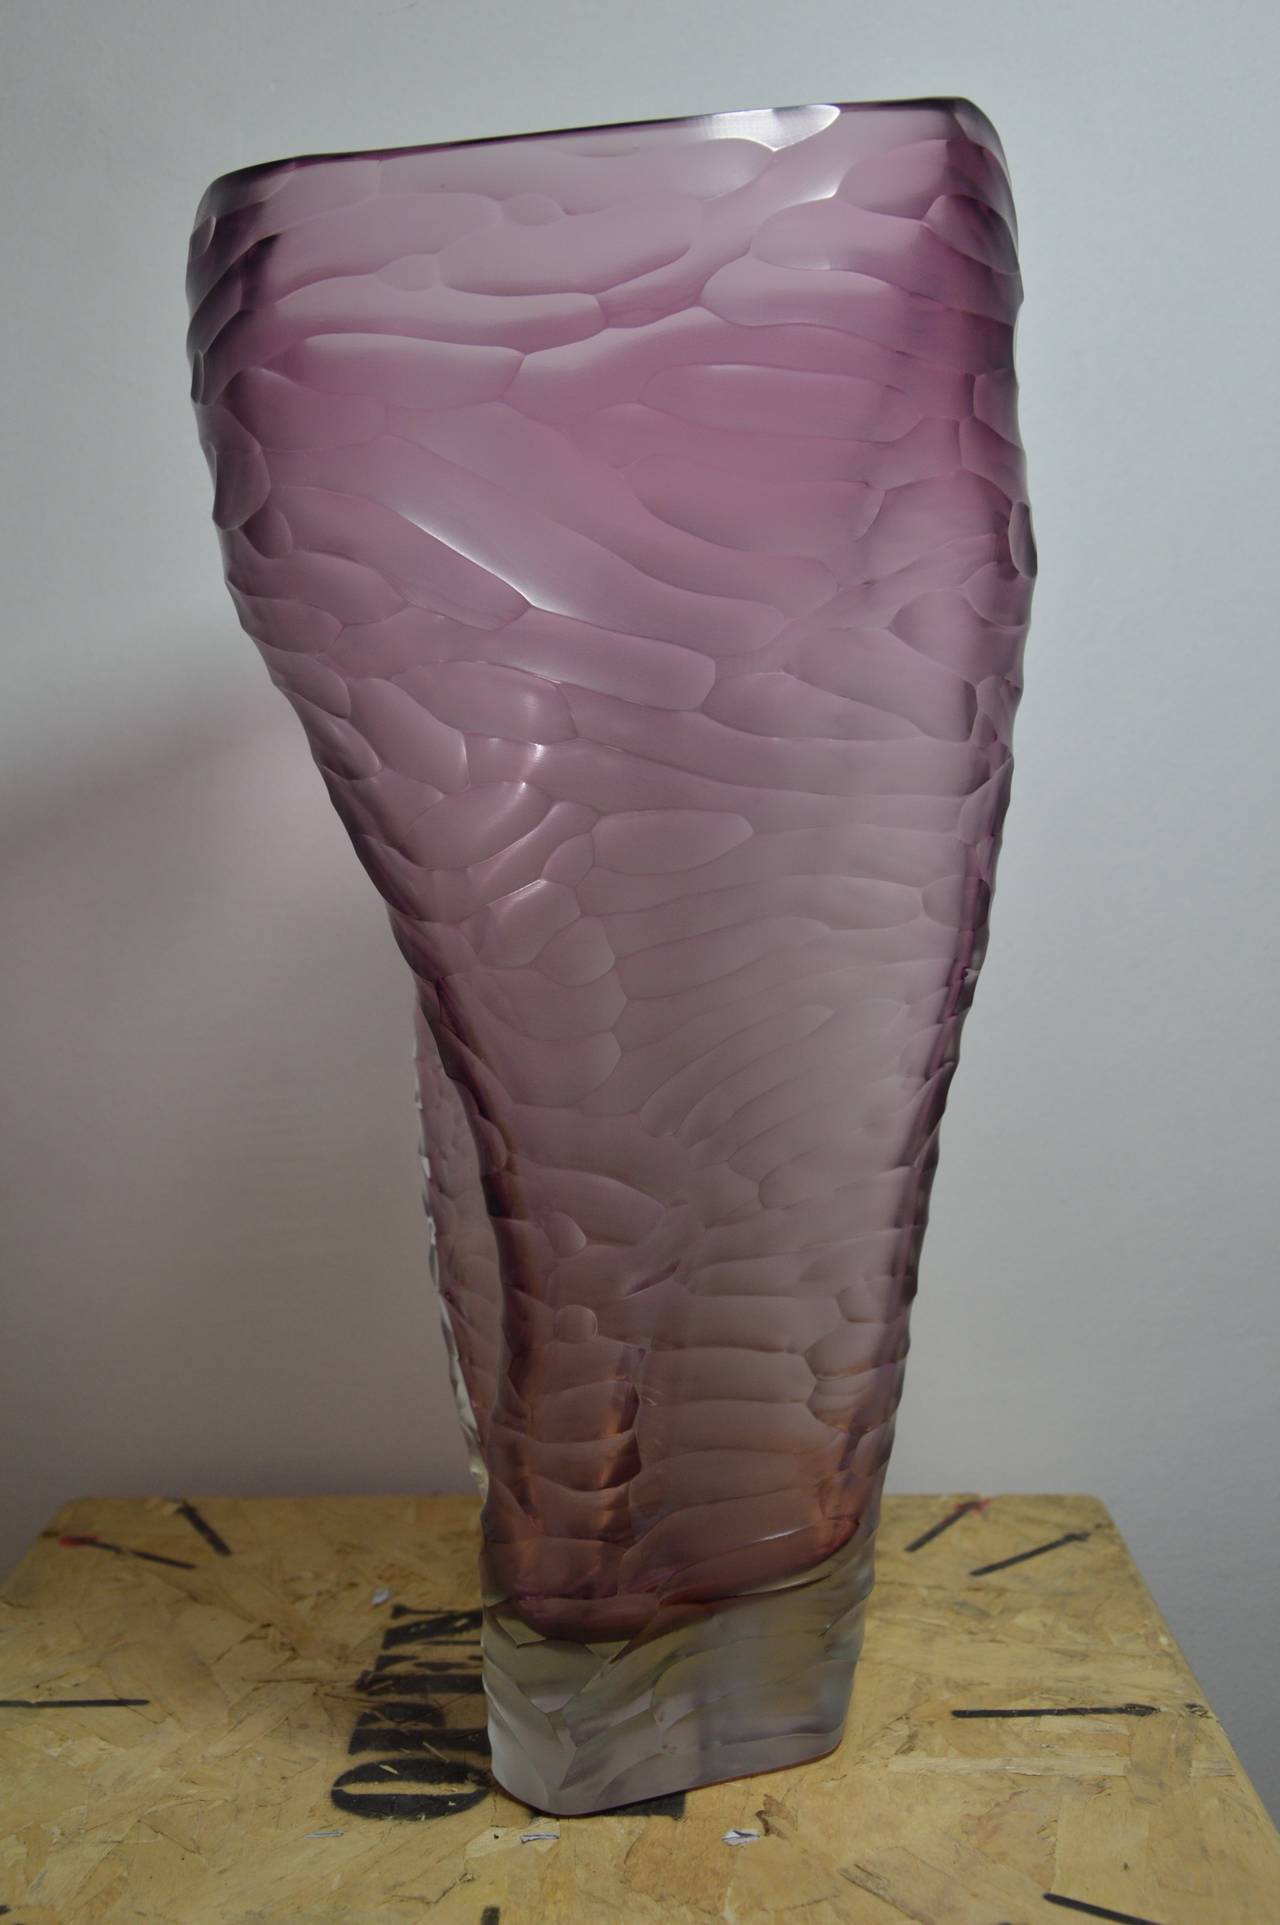 Important unique vase made by hand by Massimo Micheluzzi. Work as some wood hollowed out in scissors. 
Signed on the bottom, with certificate. 
Measures: H 48.5 cm. D of the base: 12 cm. D of the head: 23cm.